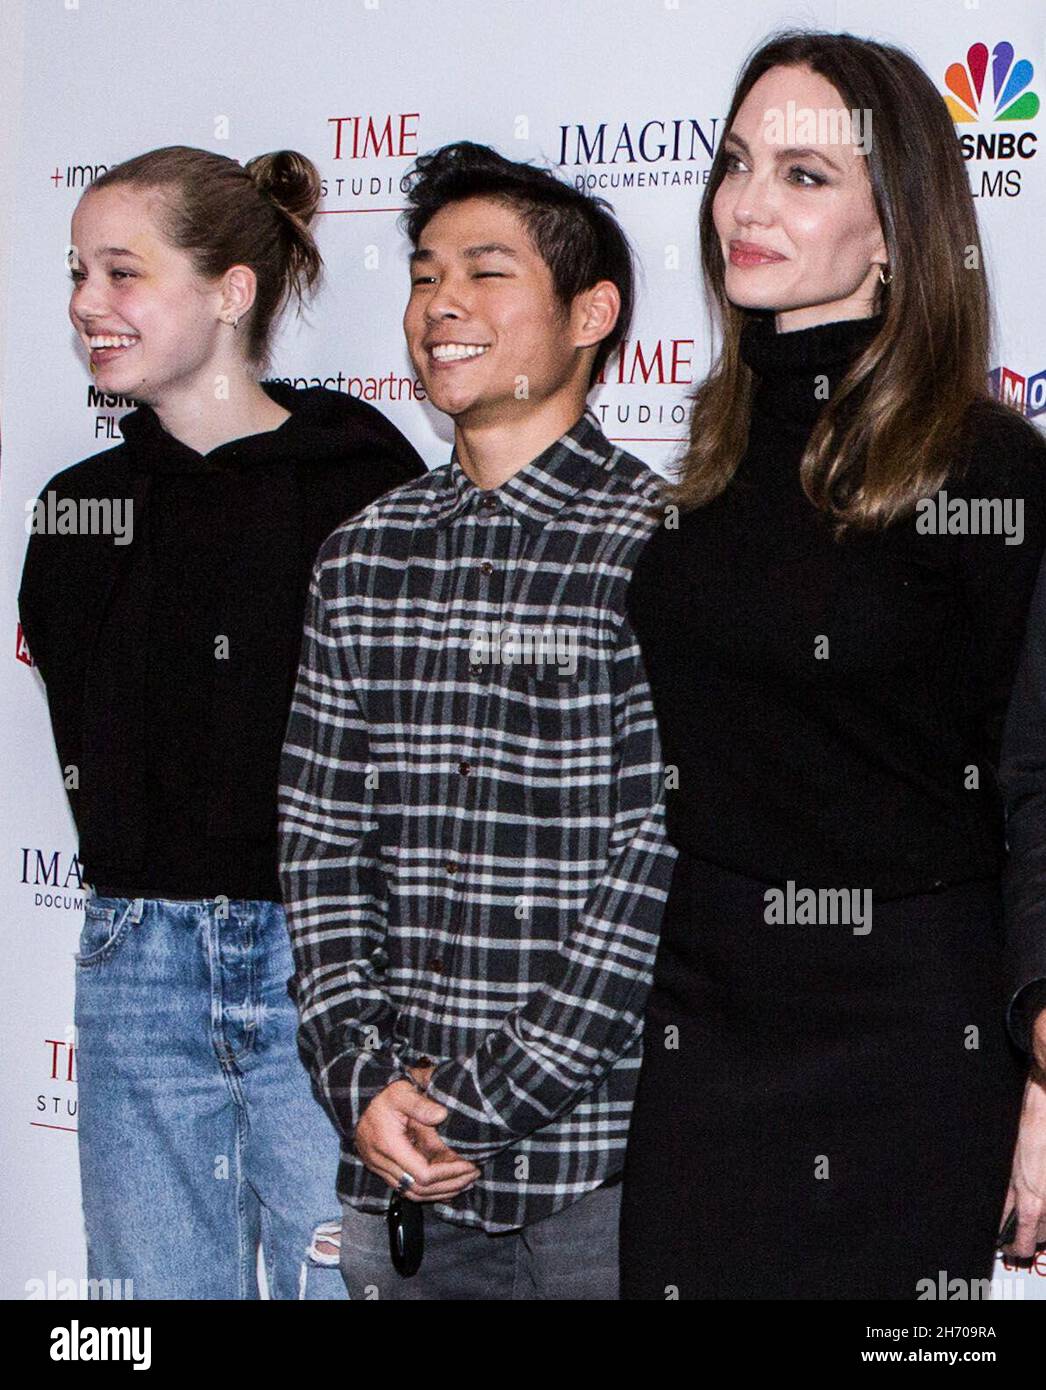 Los Angeles, United States. 18th Nov, 2021. LOS ANGELES, CALIFORNIA, USA - NOVEMBER 18: Shiloh Jolie-Pitt, brother Pax Thien Jolie-Pitt and mother/actress Angelina Jolie arrive at the Los Angeles Premiere Of MSNBC Films' 'Paper & Glue: A JR Project' held at the Museum Of Tolerance on November 18, 2021 in Los Angeles, California, United States. (Photo by Rudy Torres/Image Press Agency) Credit: Image Press Agency/Alamy Live News Stock Photo